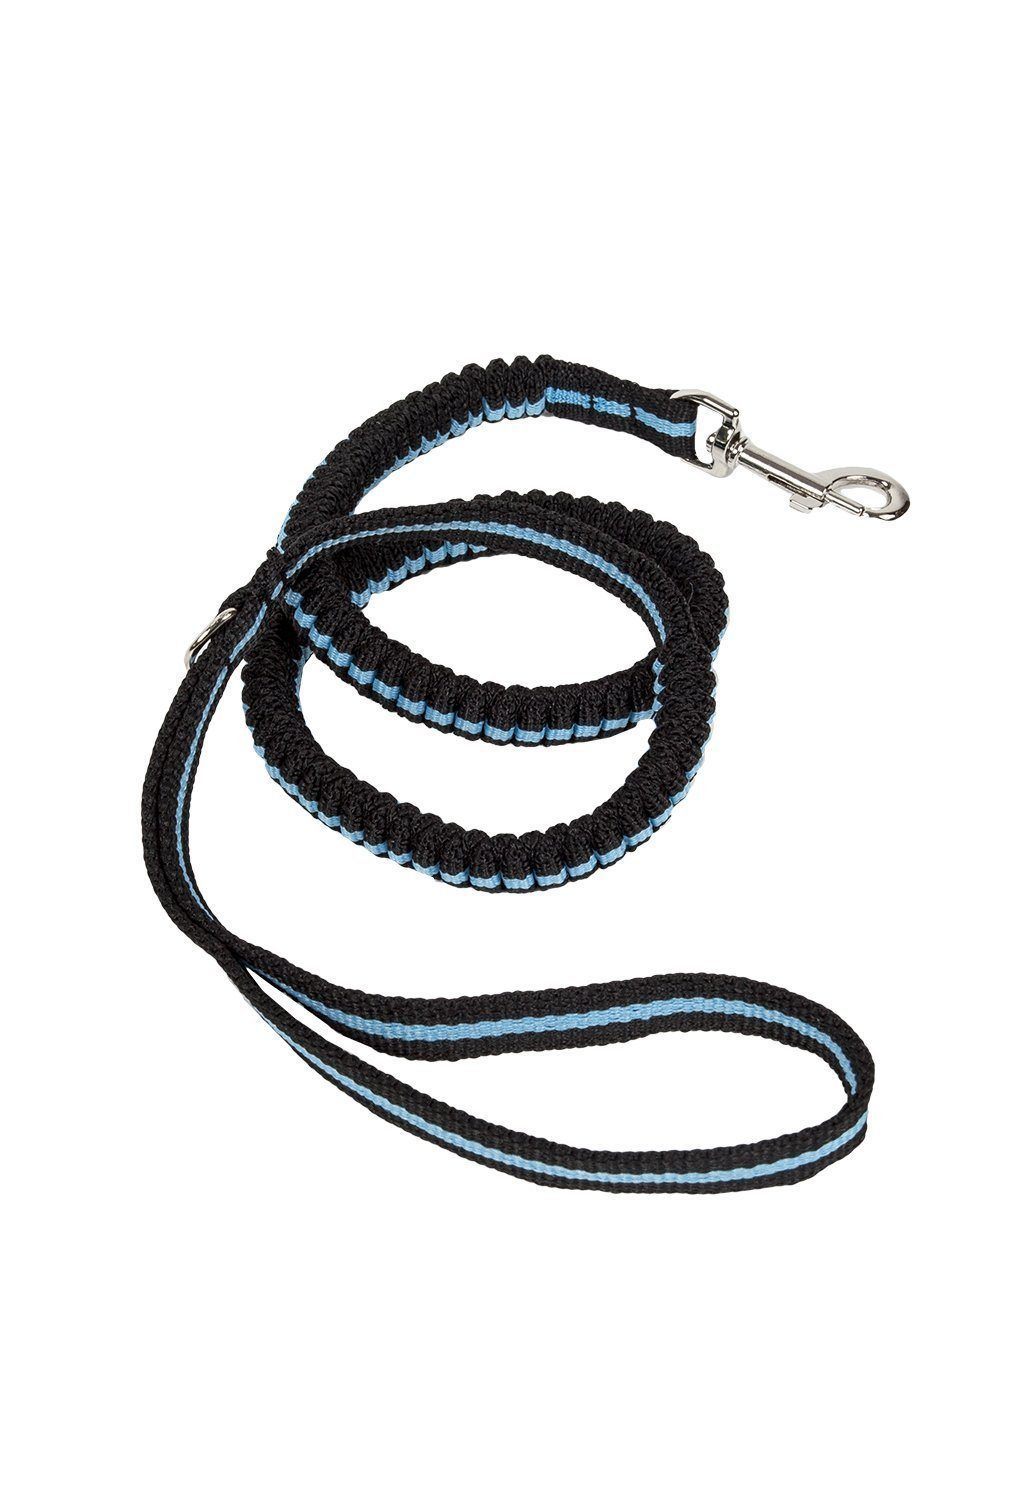 Pet Life ® 'Retract-A-Wag' Shock Absorption Stitched Durable Pet Dog Leash Blue 